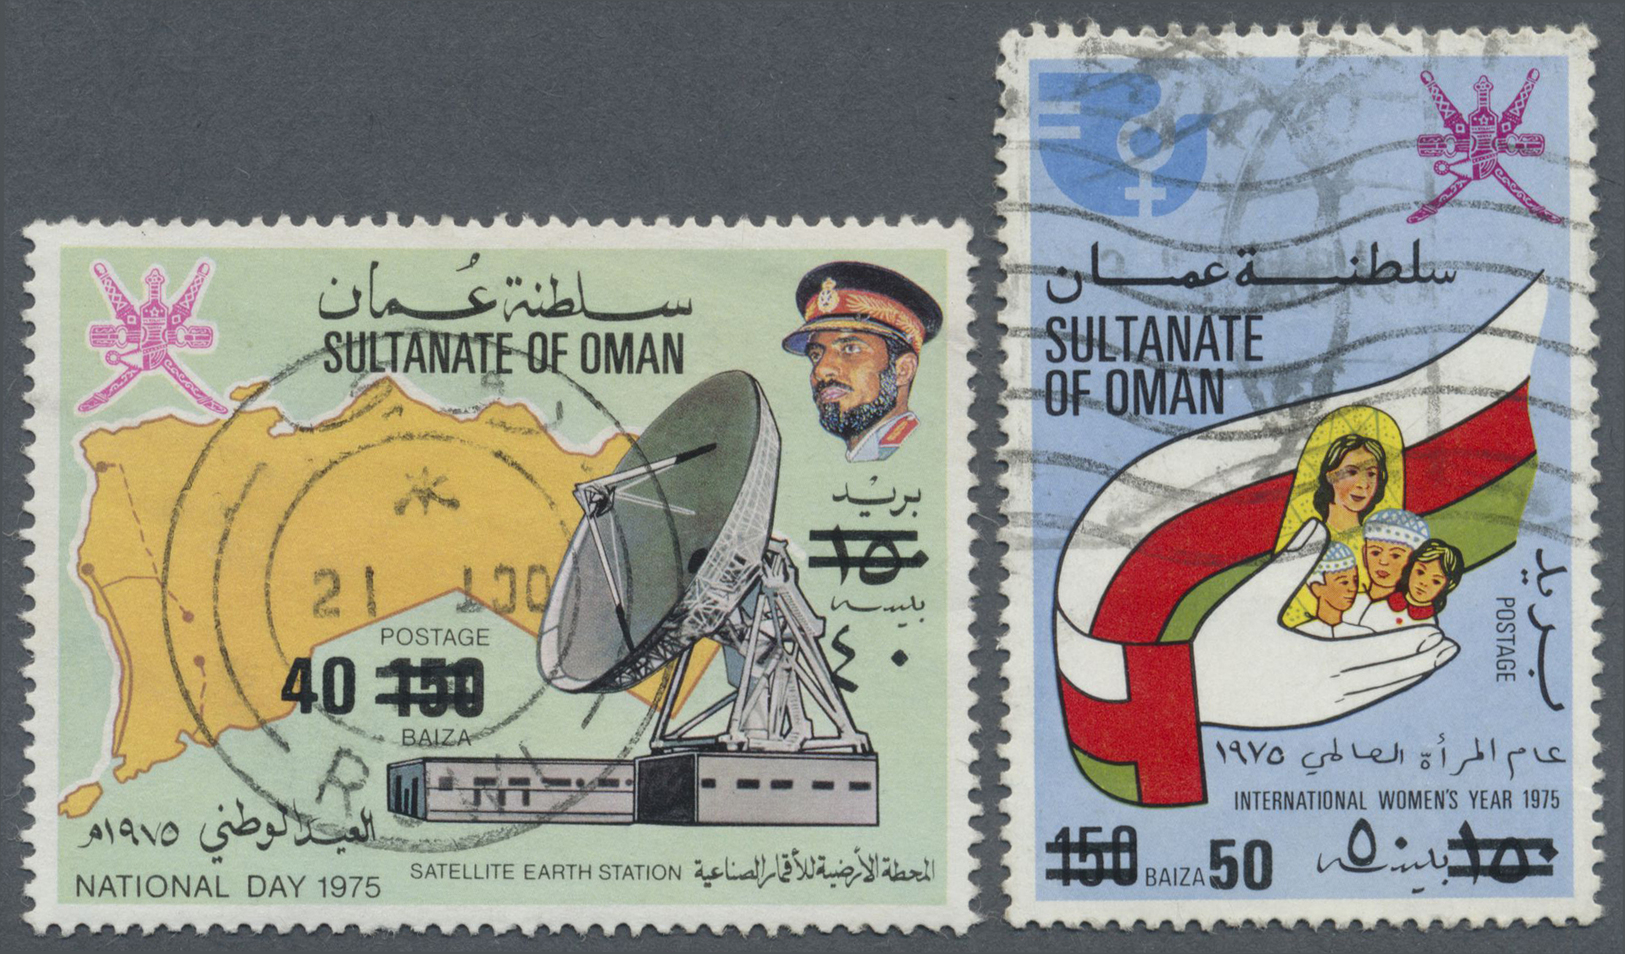 O Oman: 1978. The First Two Of The Rare Sucharged Stamps 40b On 150b And 50b On 150b. Used. Fine. (Mi. Cat. Value 850 EU - Oman